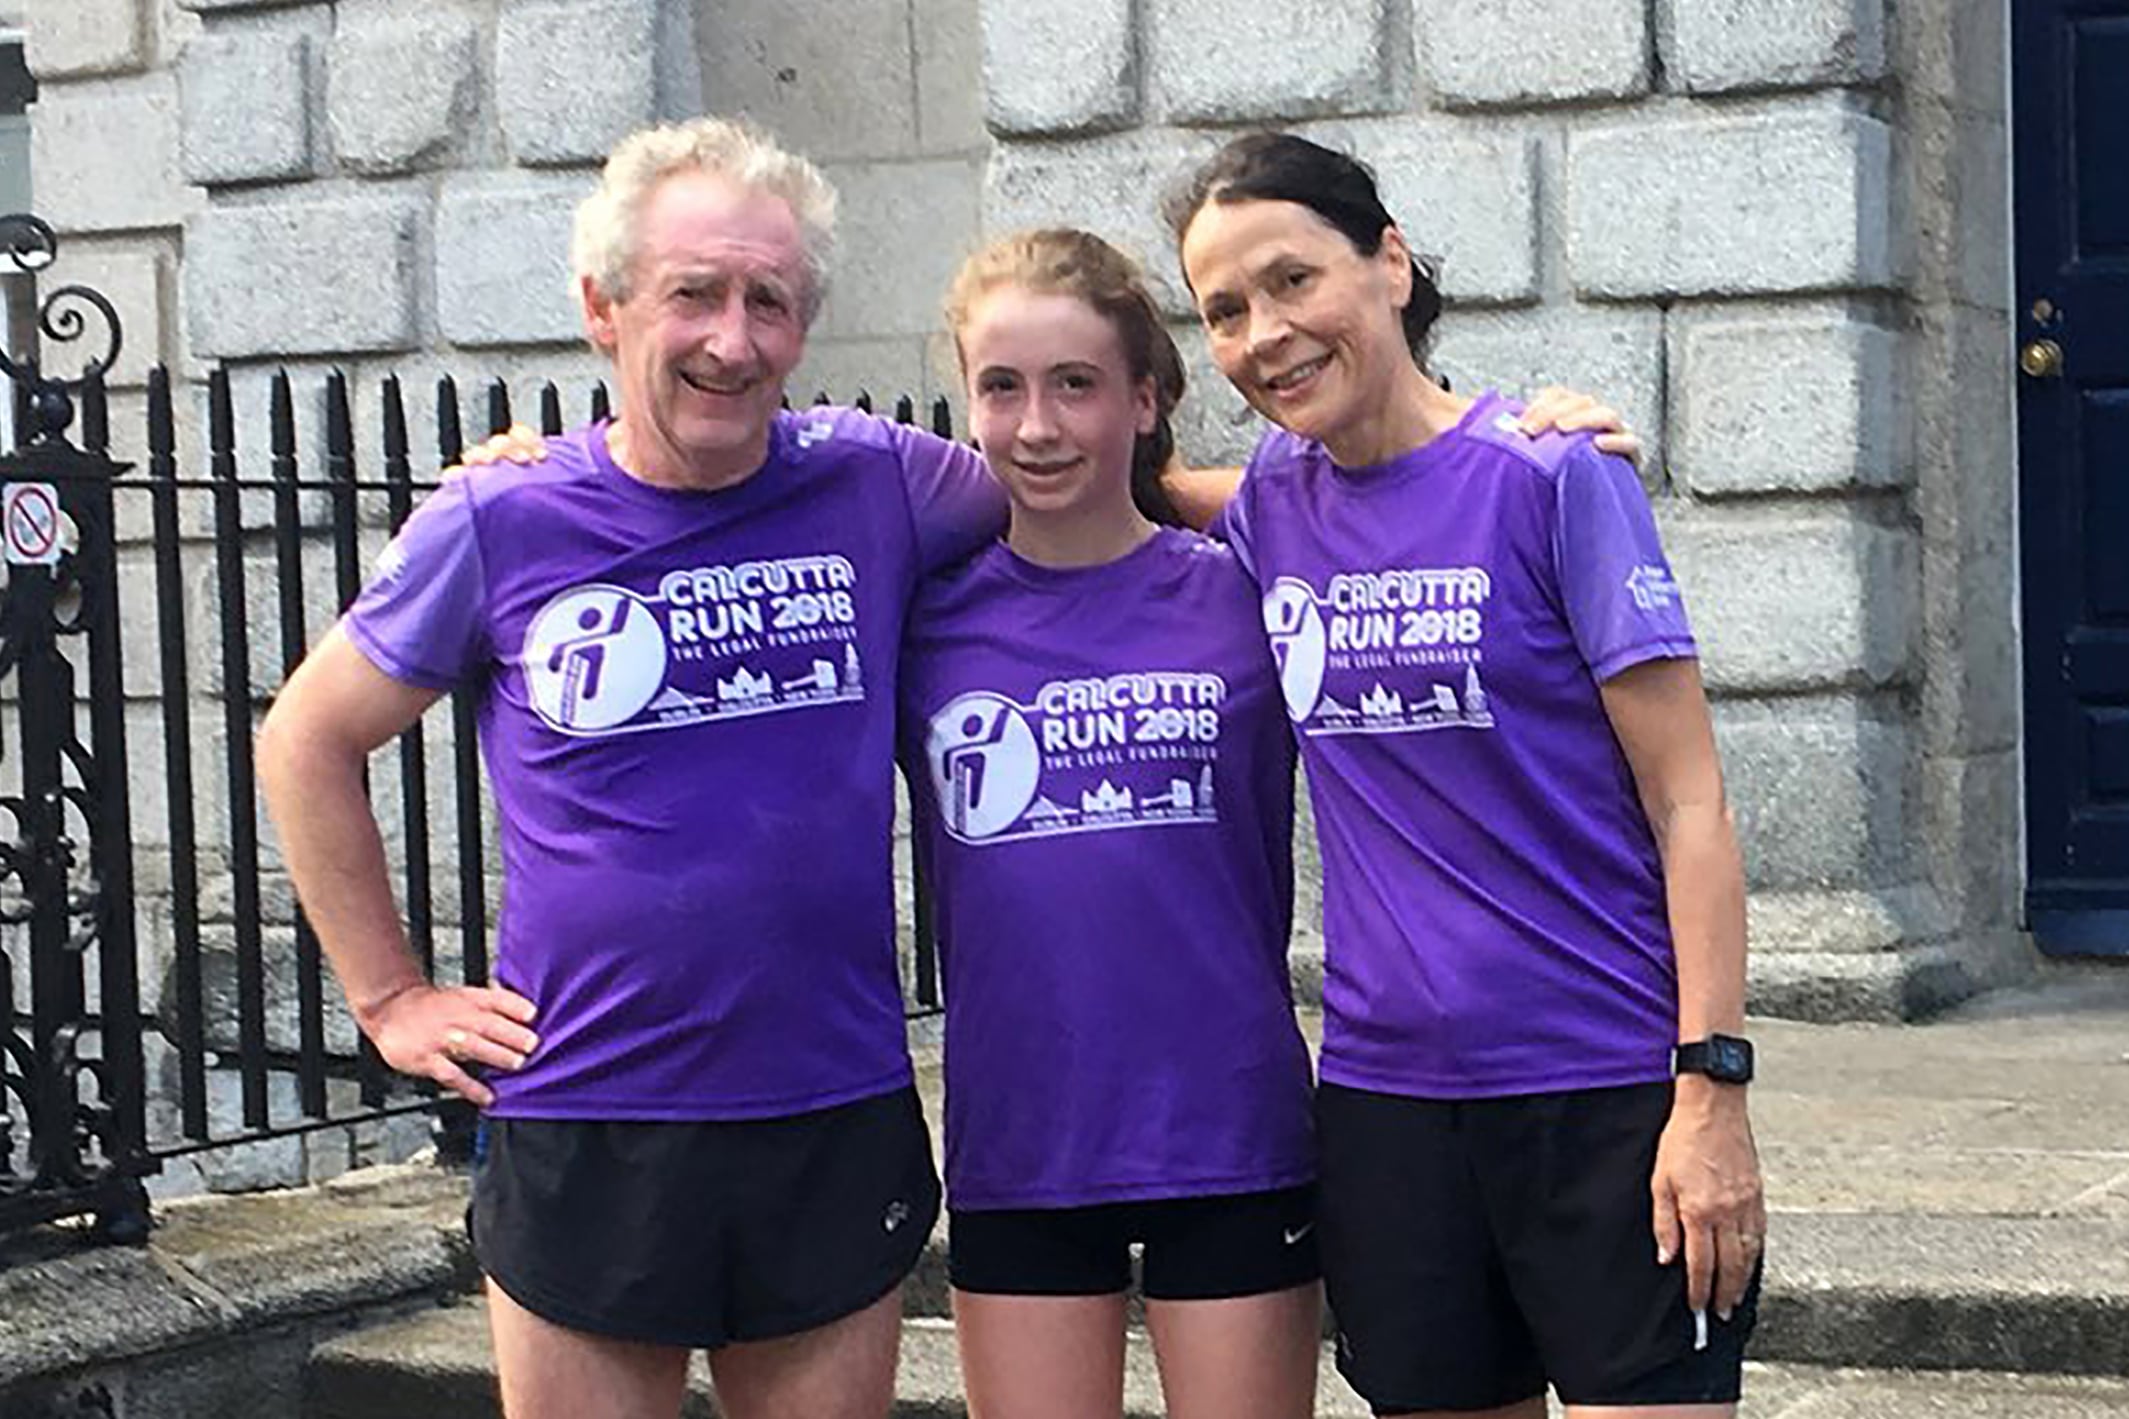 Law Society financial director Cillian MacDomhnaill with his wife Cathy and daughter Clodagh 